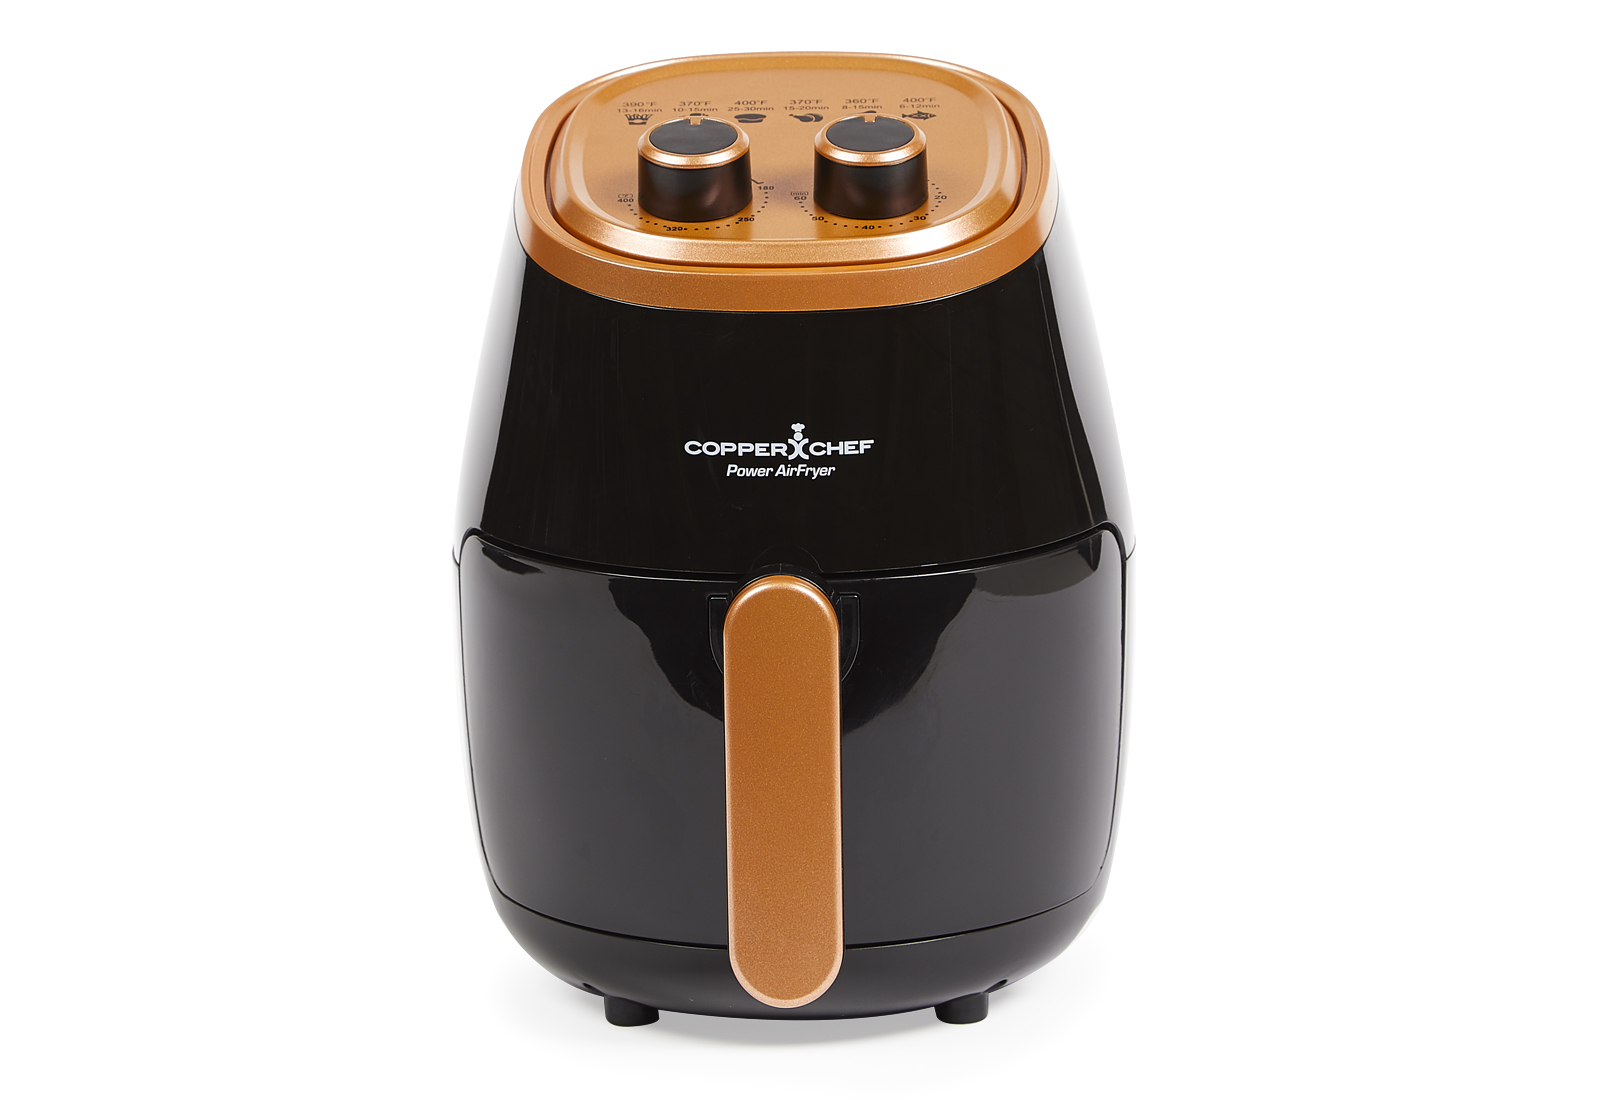 Copper Chef AirFryer Product Image